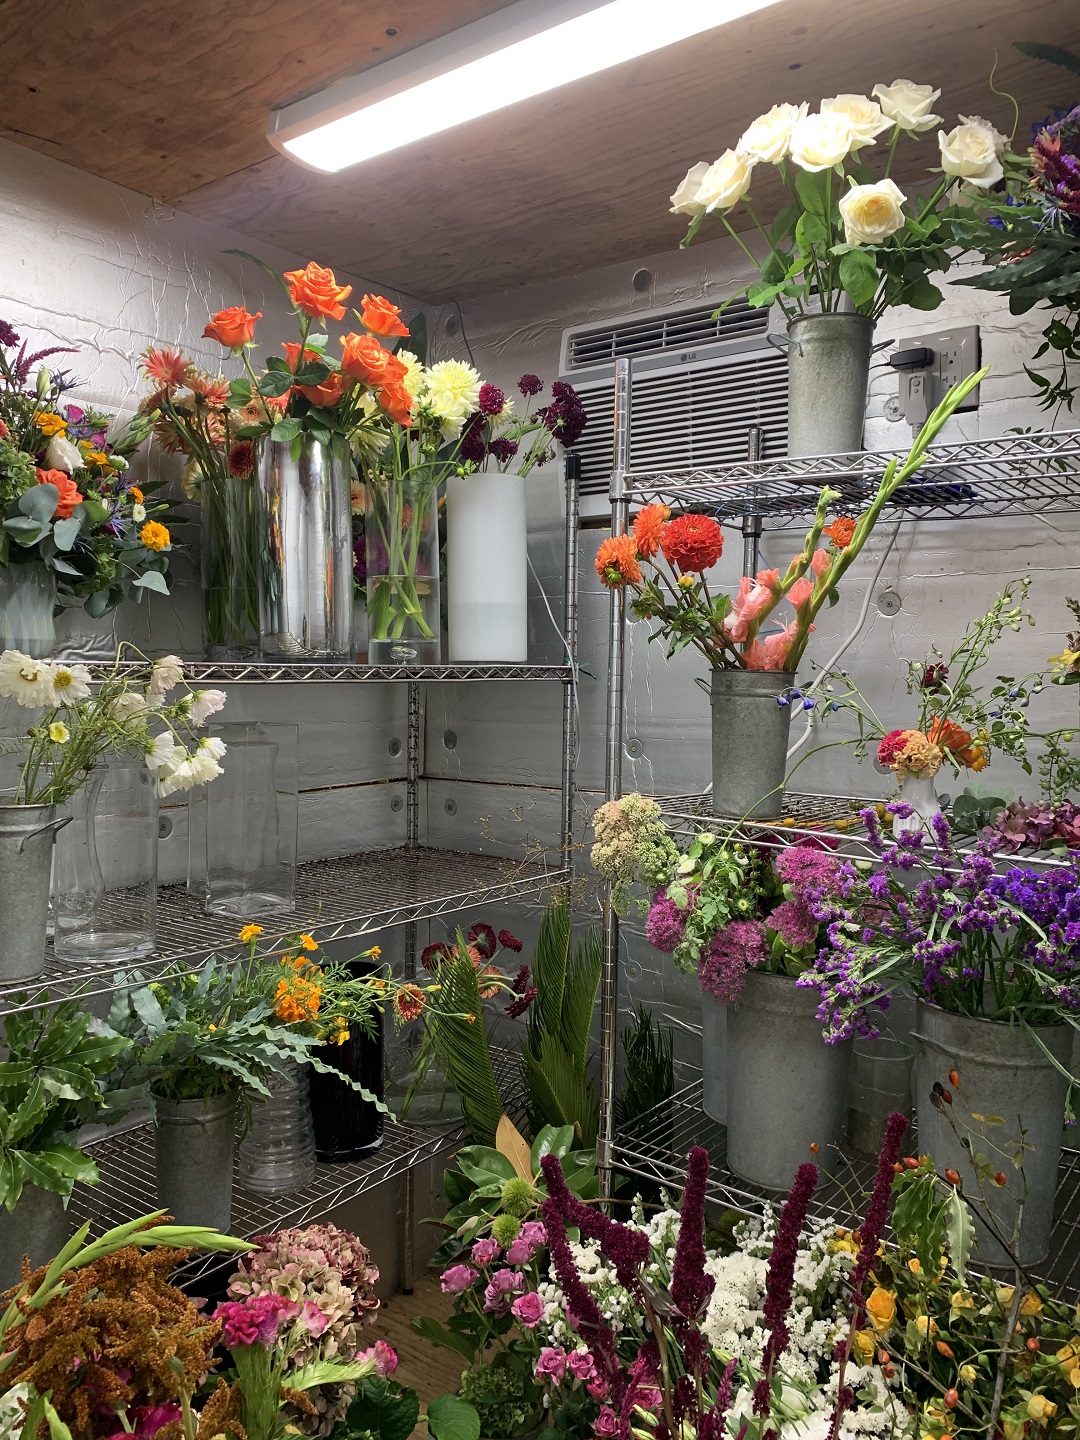 Walk-in cooler to store flowers